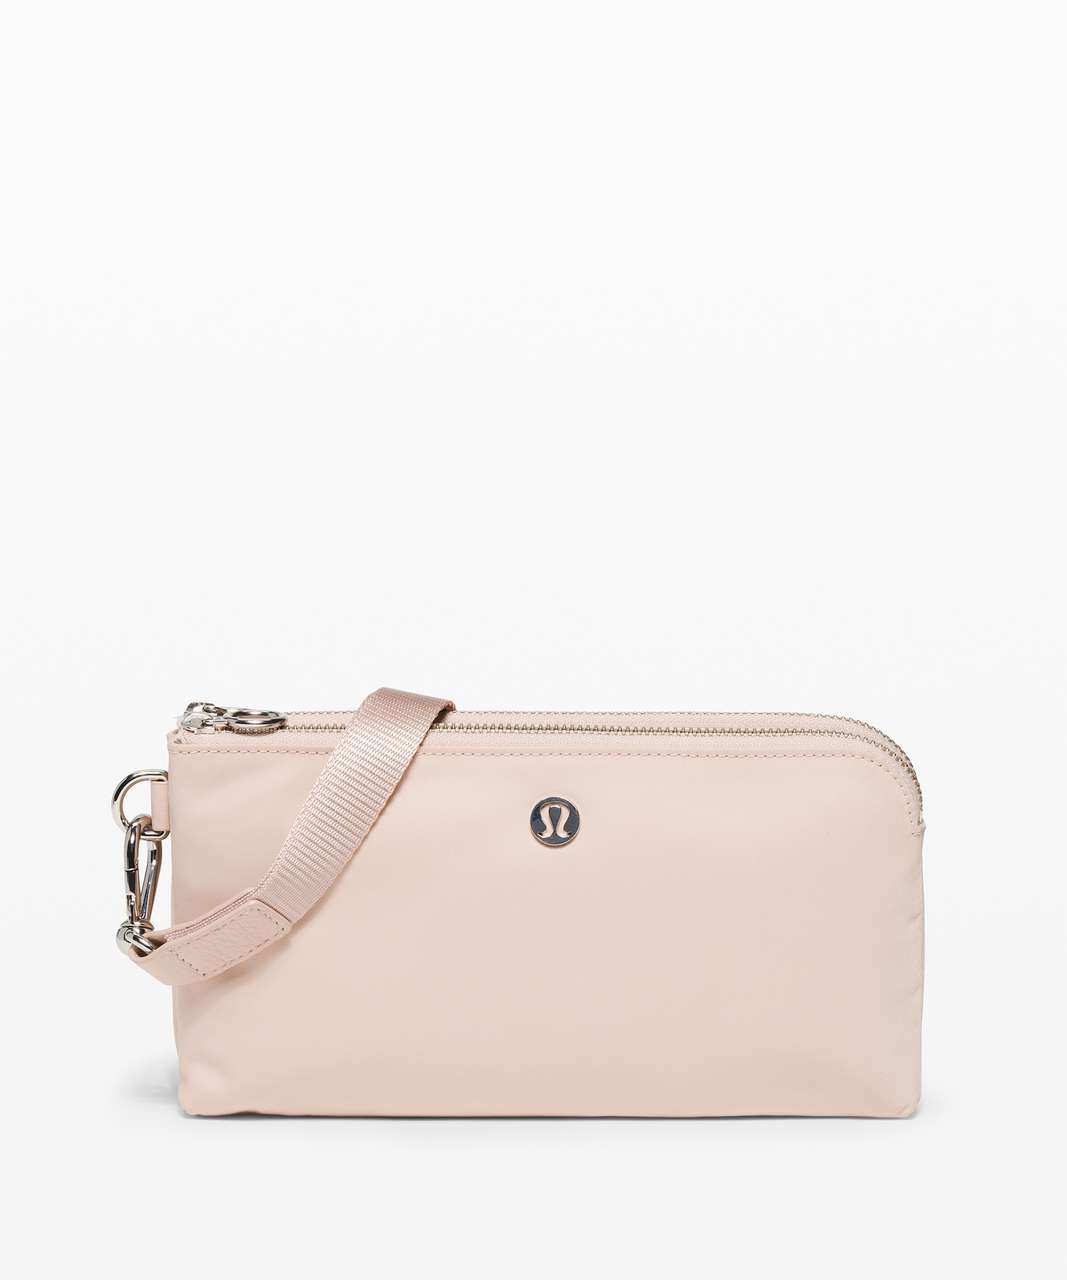 Lululemon Now and Always Pouch - Misty Shell